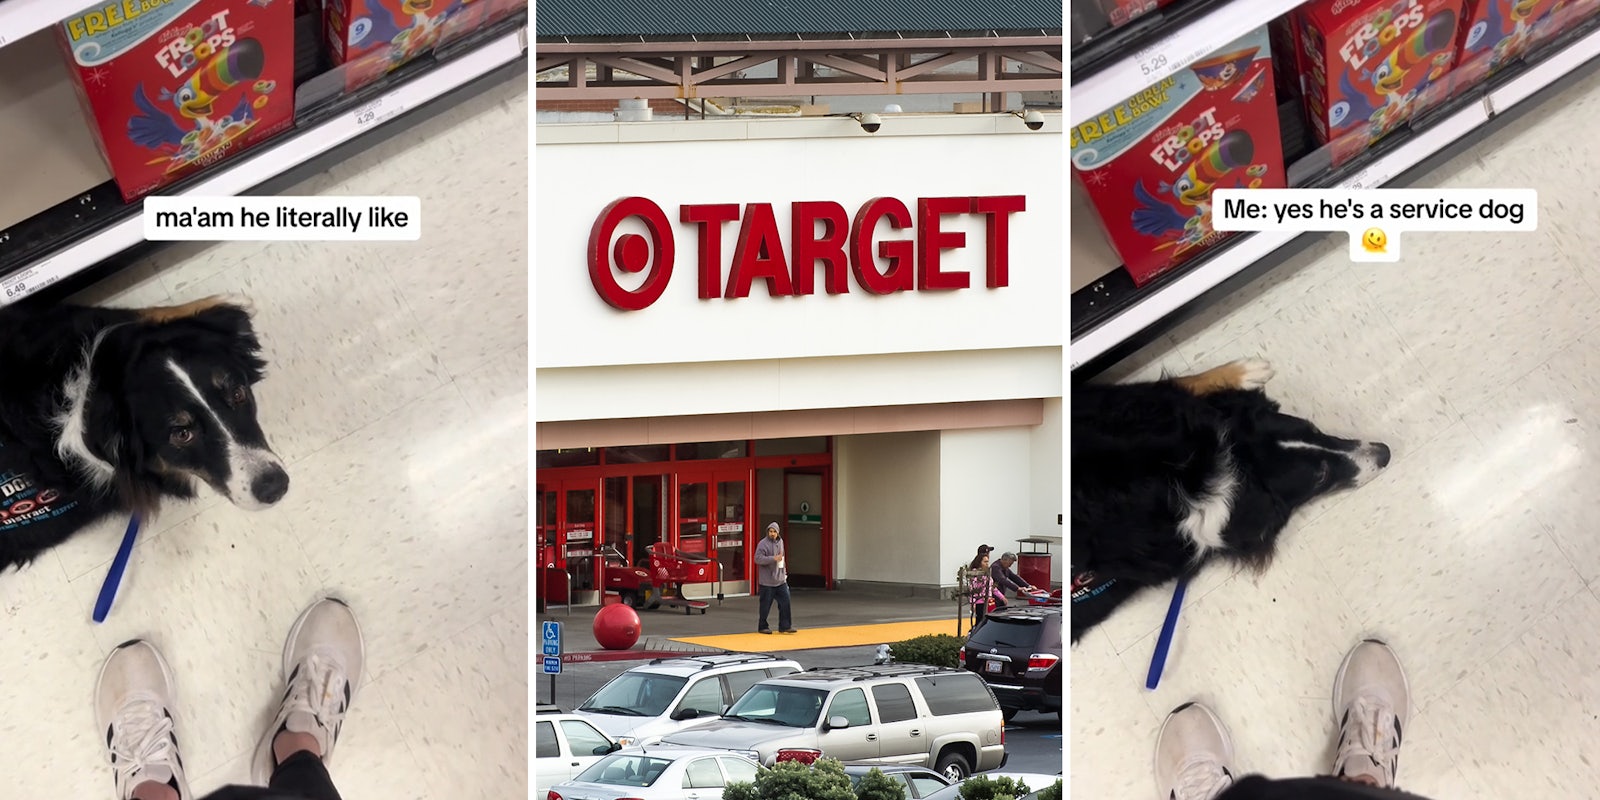 Shopper questioned for having her service dog in Target because store sells food